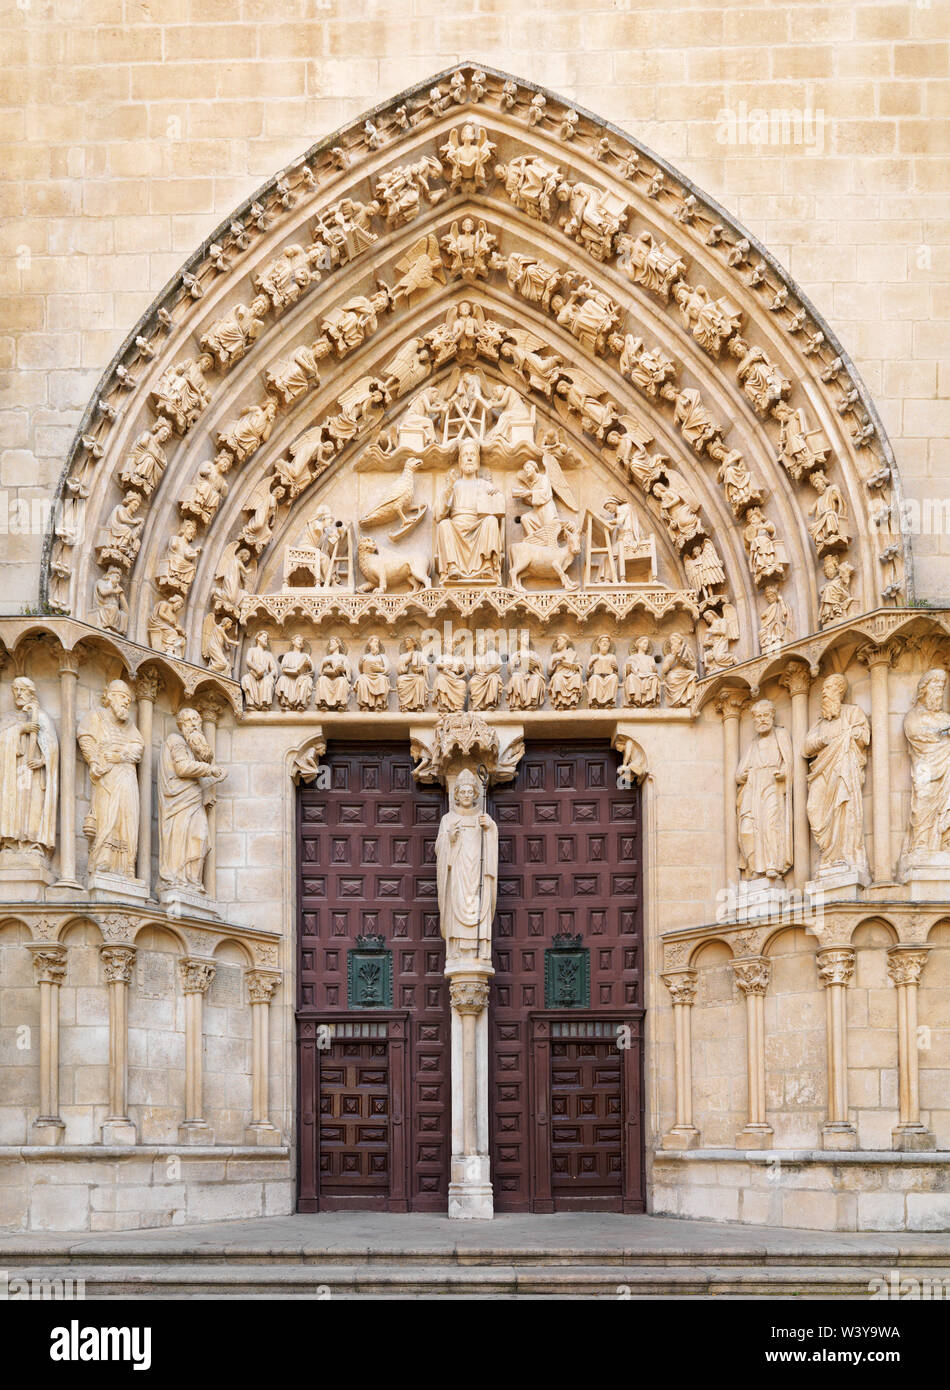 Spain, Castile and Doorway of Saint Mary of Burgos cathedral, UNESCO World Heritage site Stock Photo